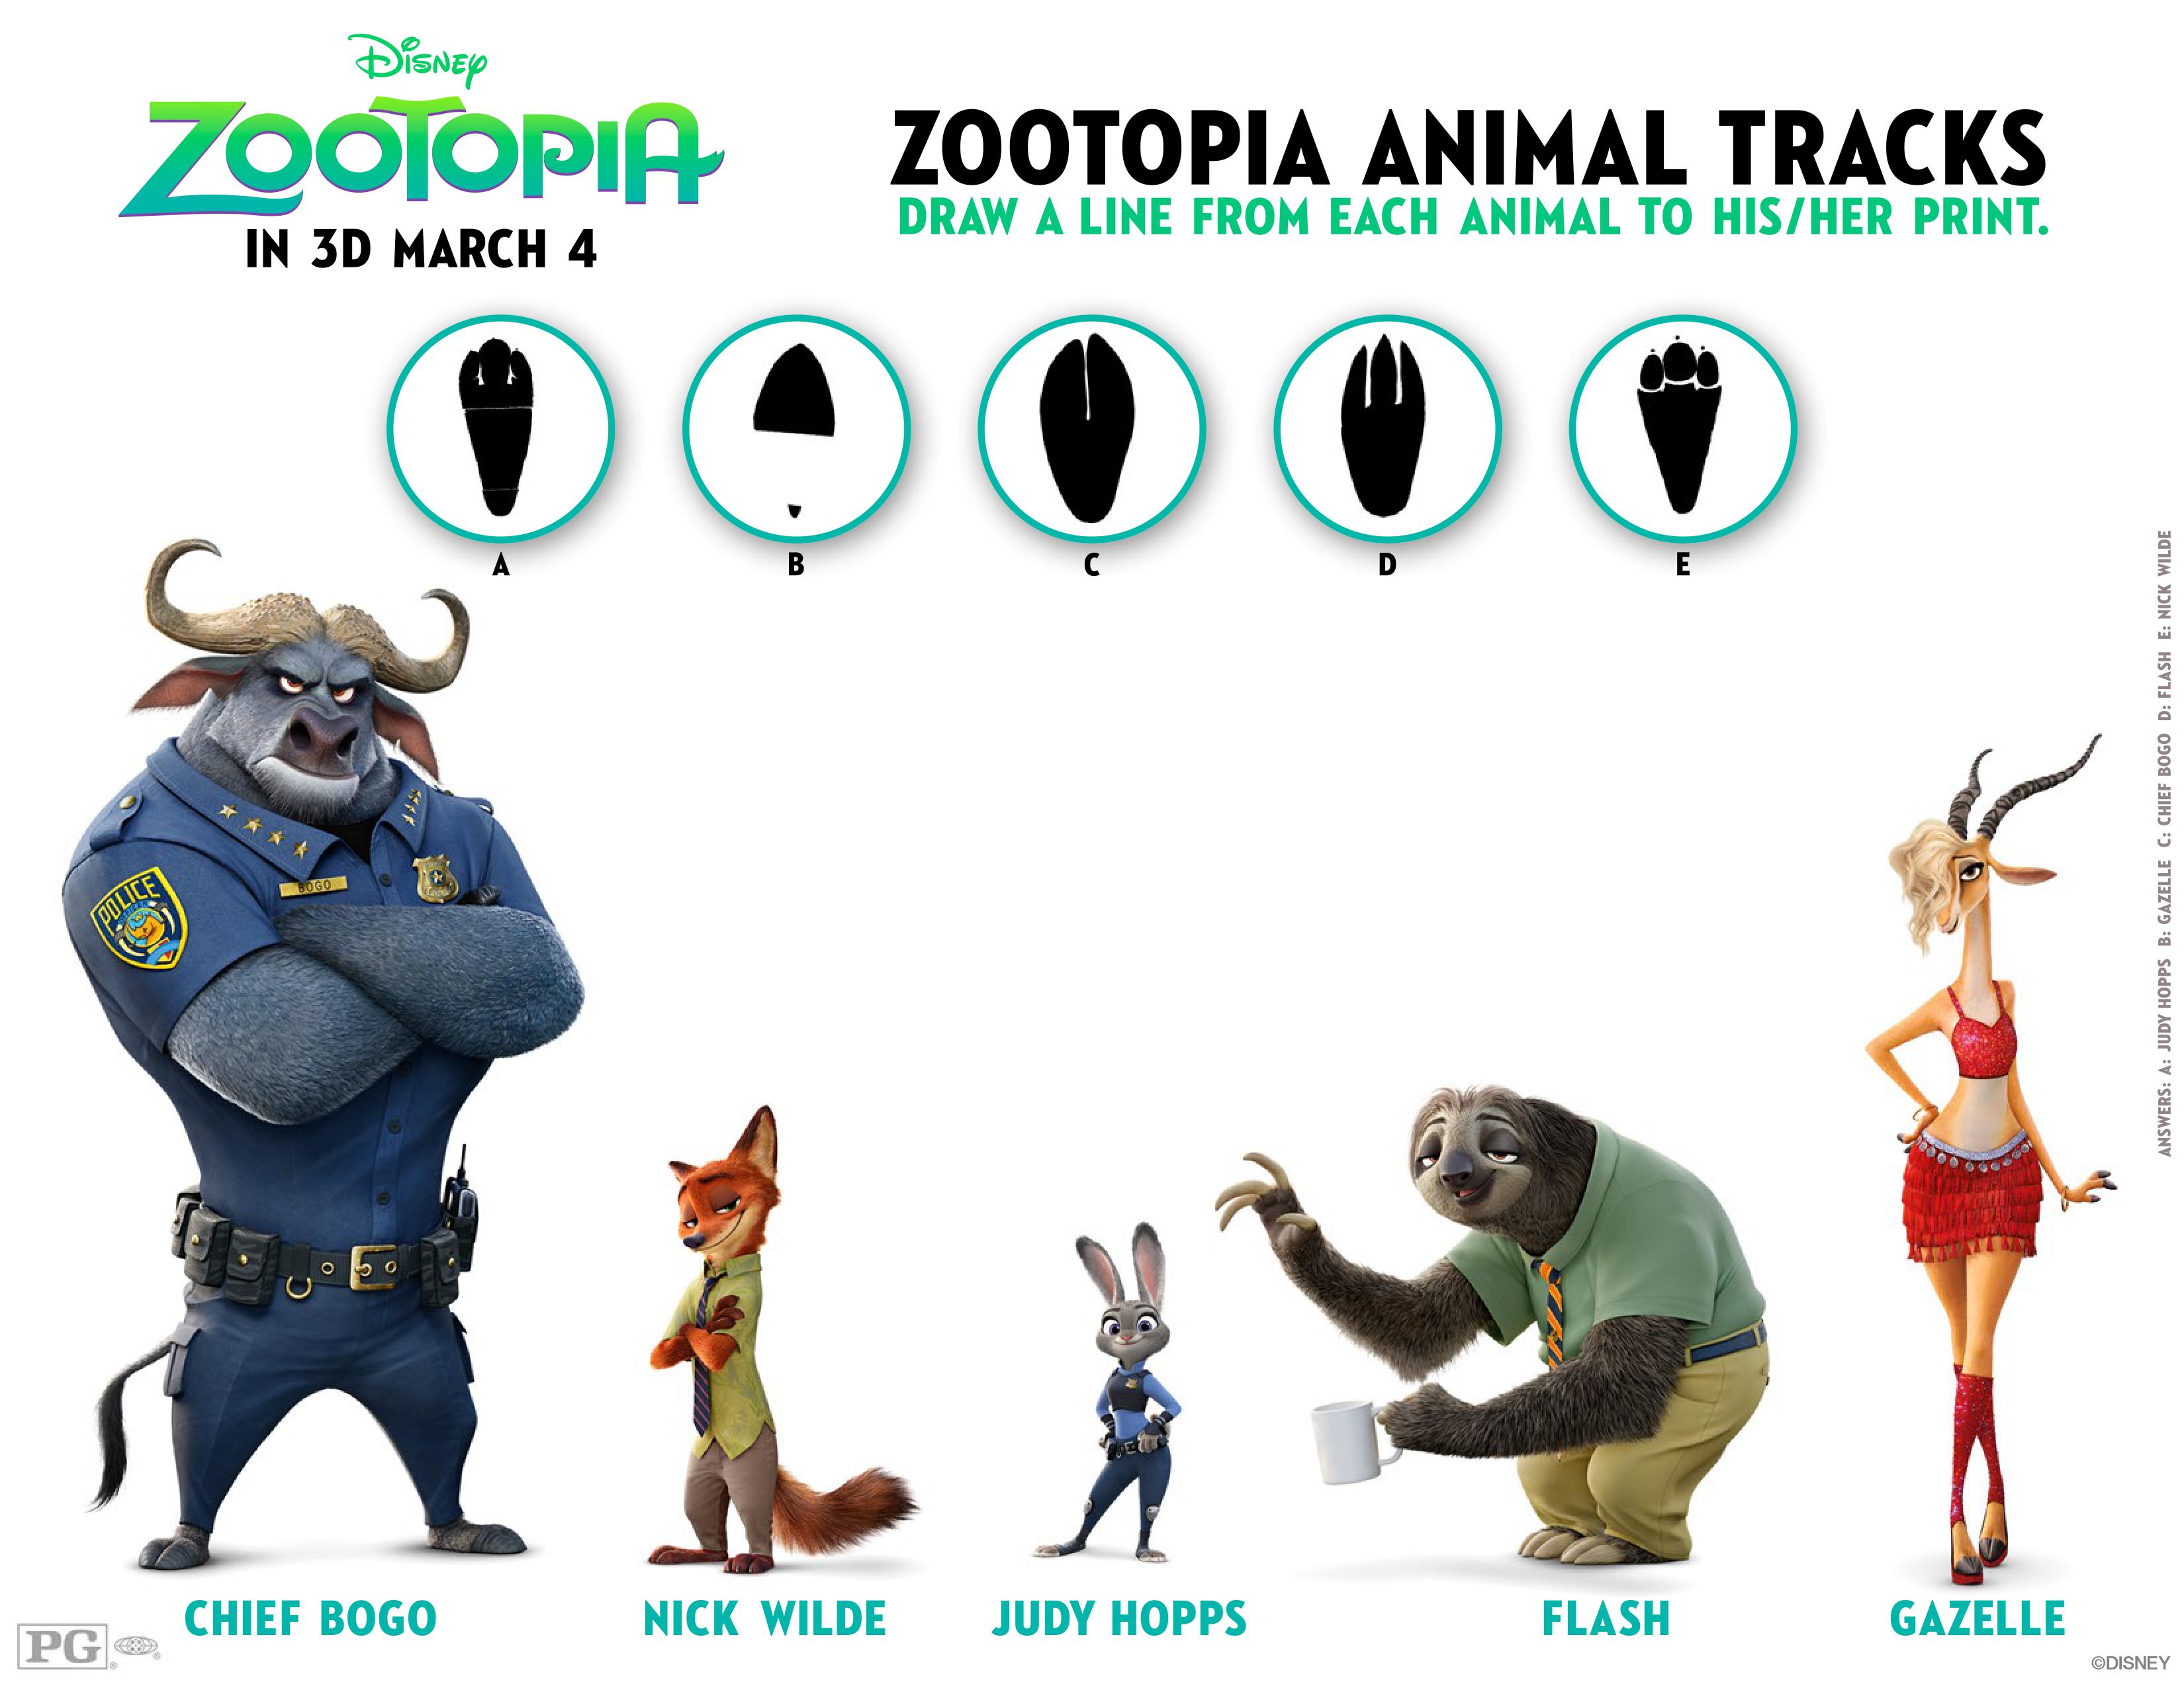 These Zootopia coloring pages and activity sheets are sure to get your gets excited about Disney's latest animated film, Zooptopia!